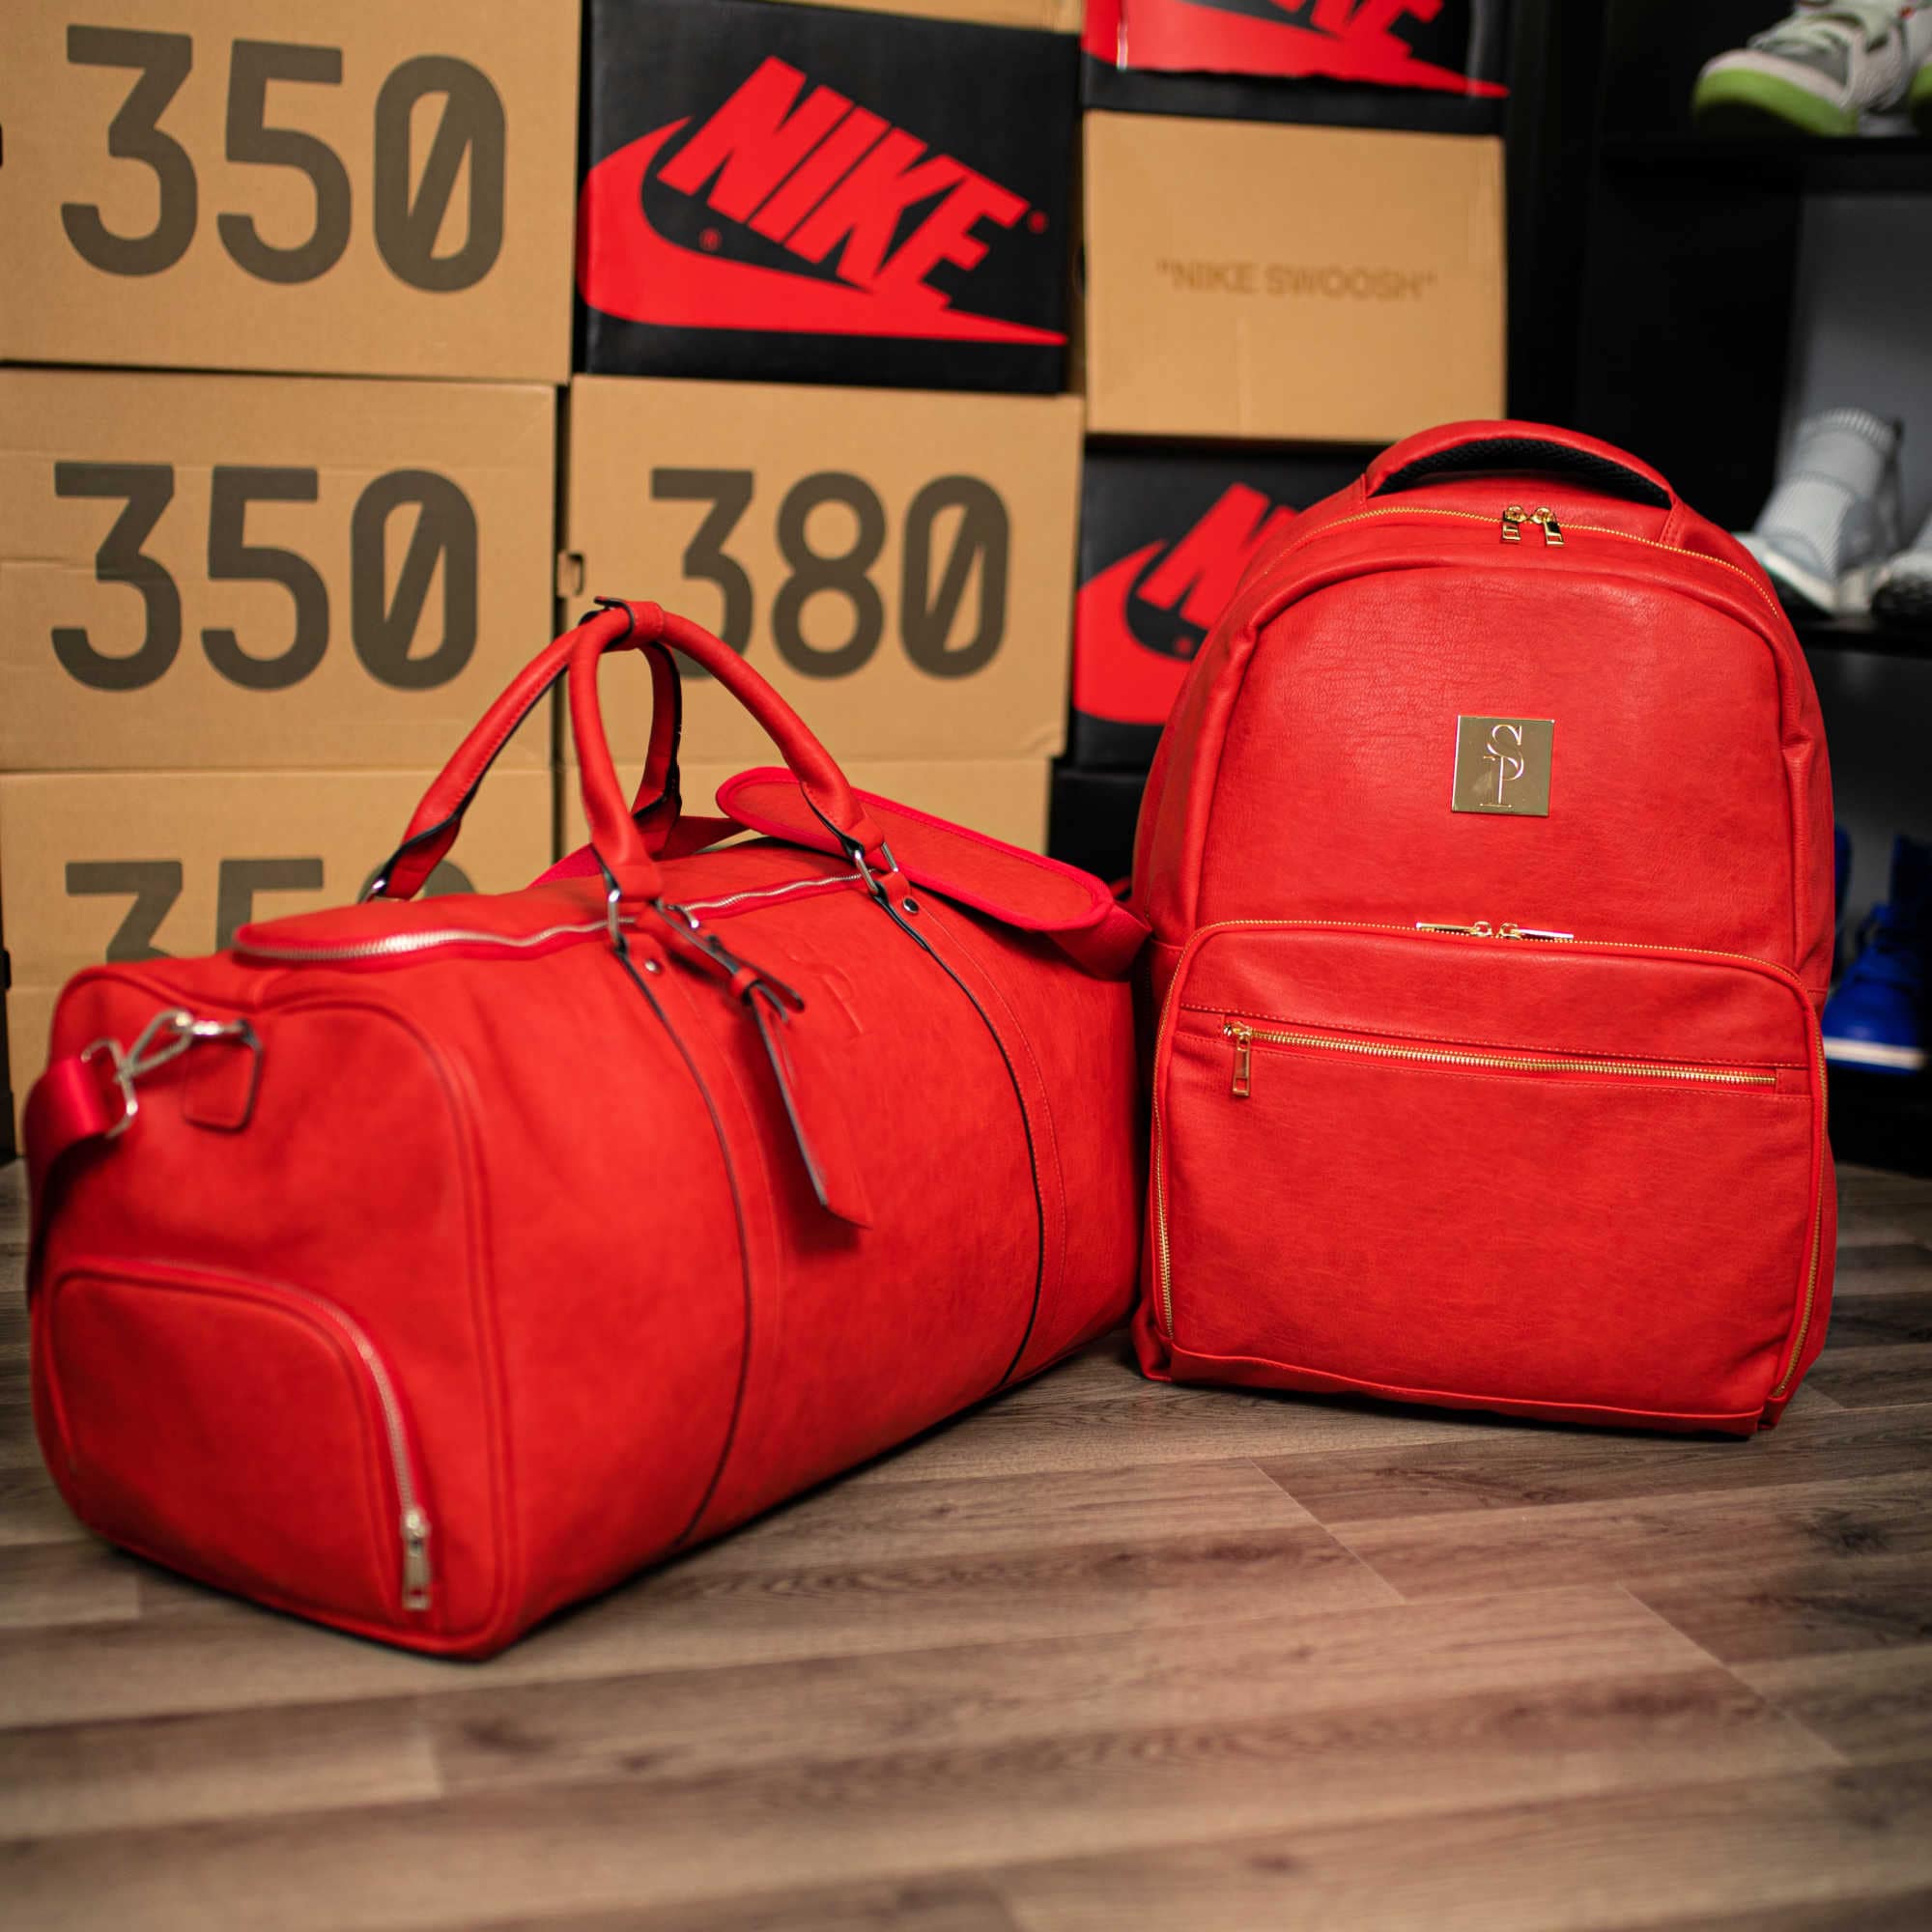 Red Tumbled Leather 2 Bag Set (Commuter and Duffle) - Sole Premise